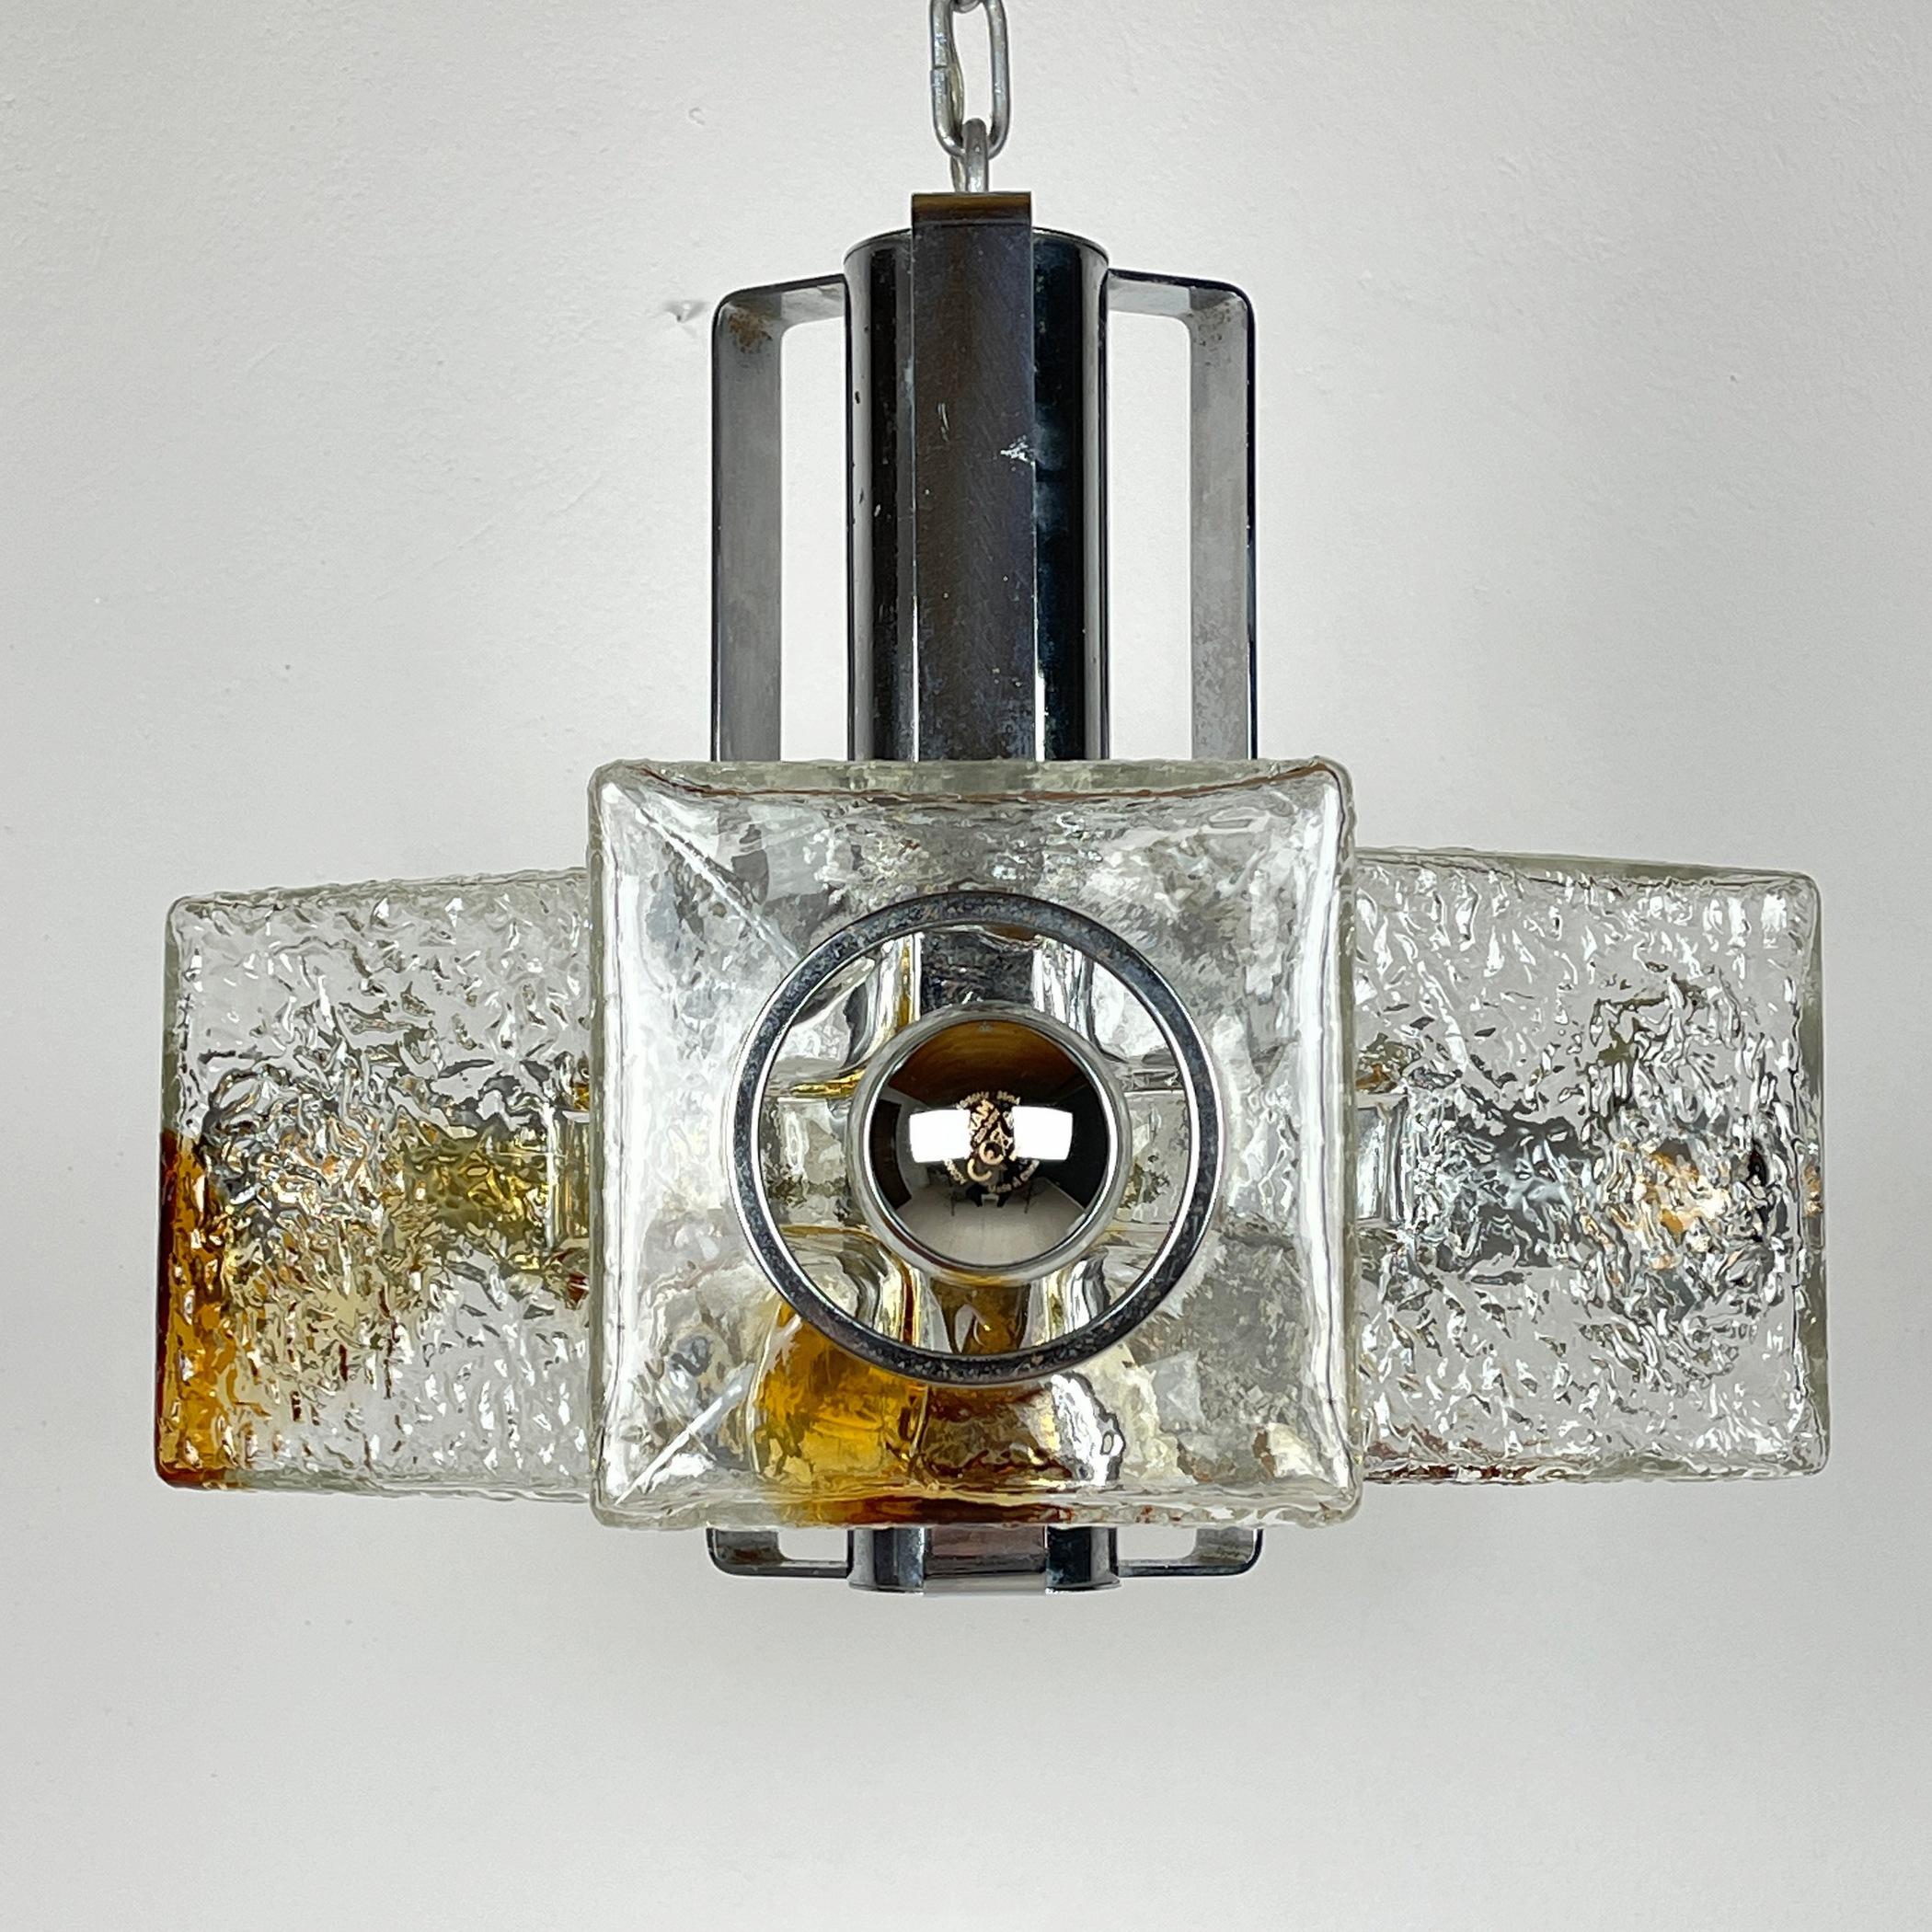 Sculpture Cube Design Murano Chandelier by Toni Zuccheri for VeArt Italy 1970s For Sale 6